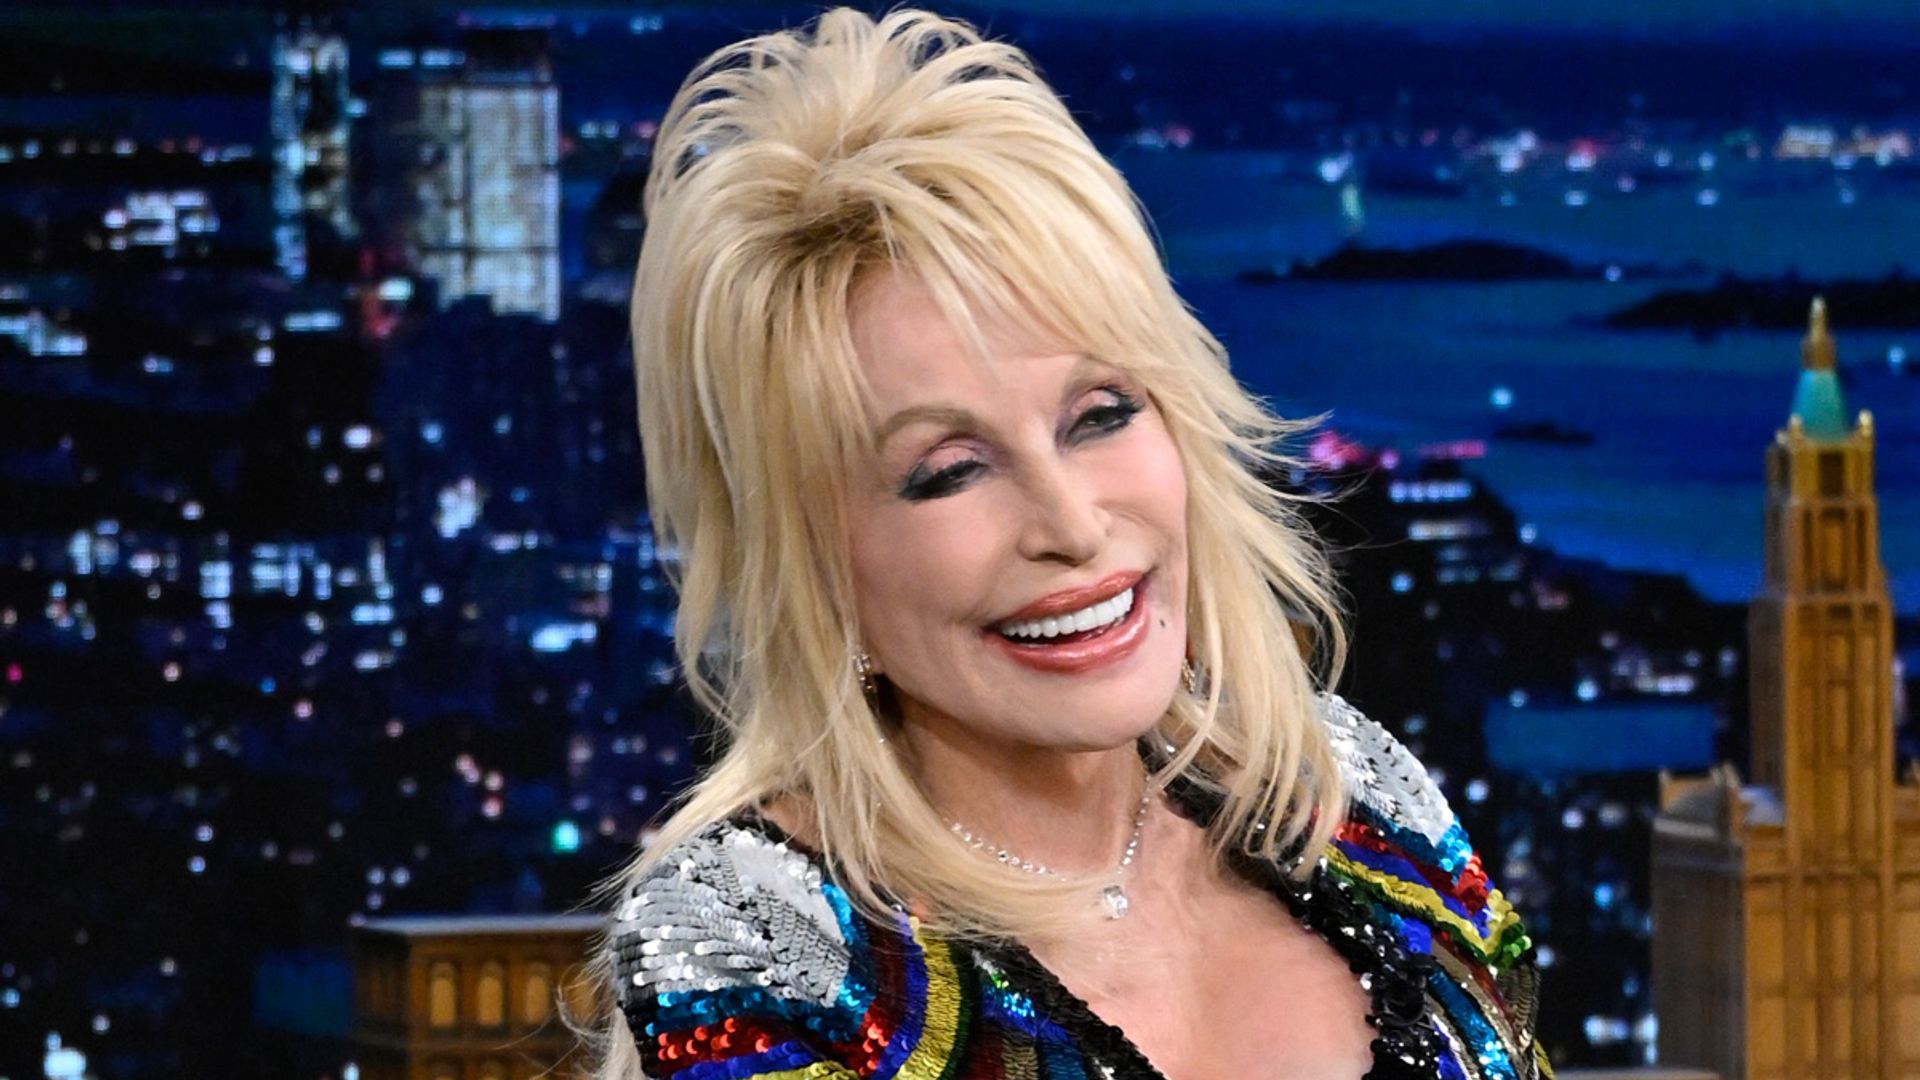 who-is-dolly-parton-s-husband-inside-the-singer-s-56-year-marriage